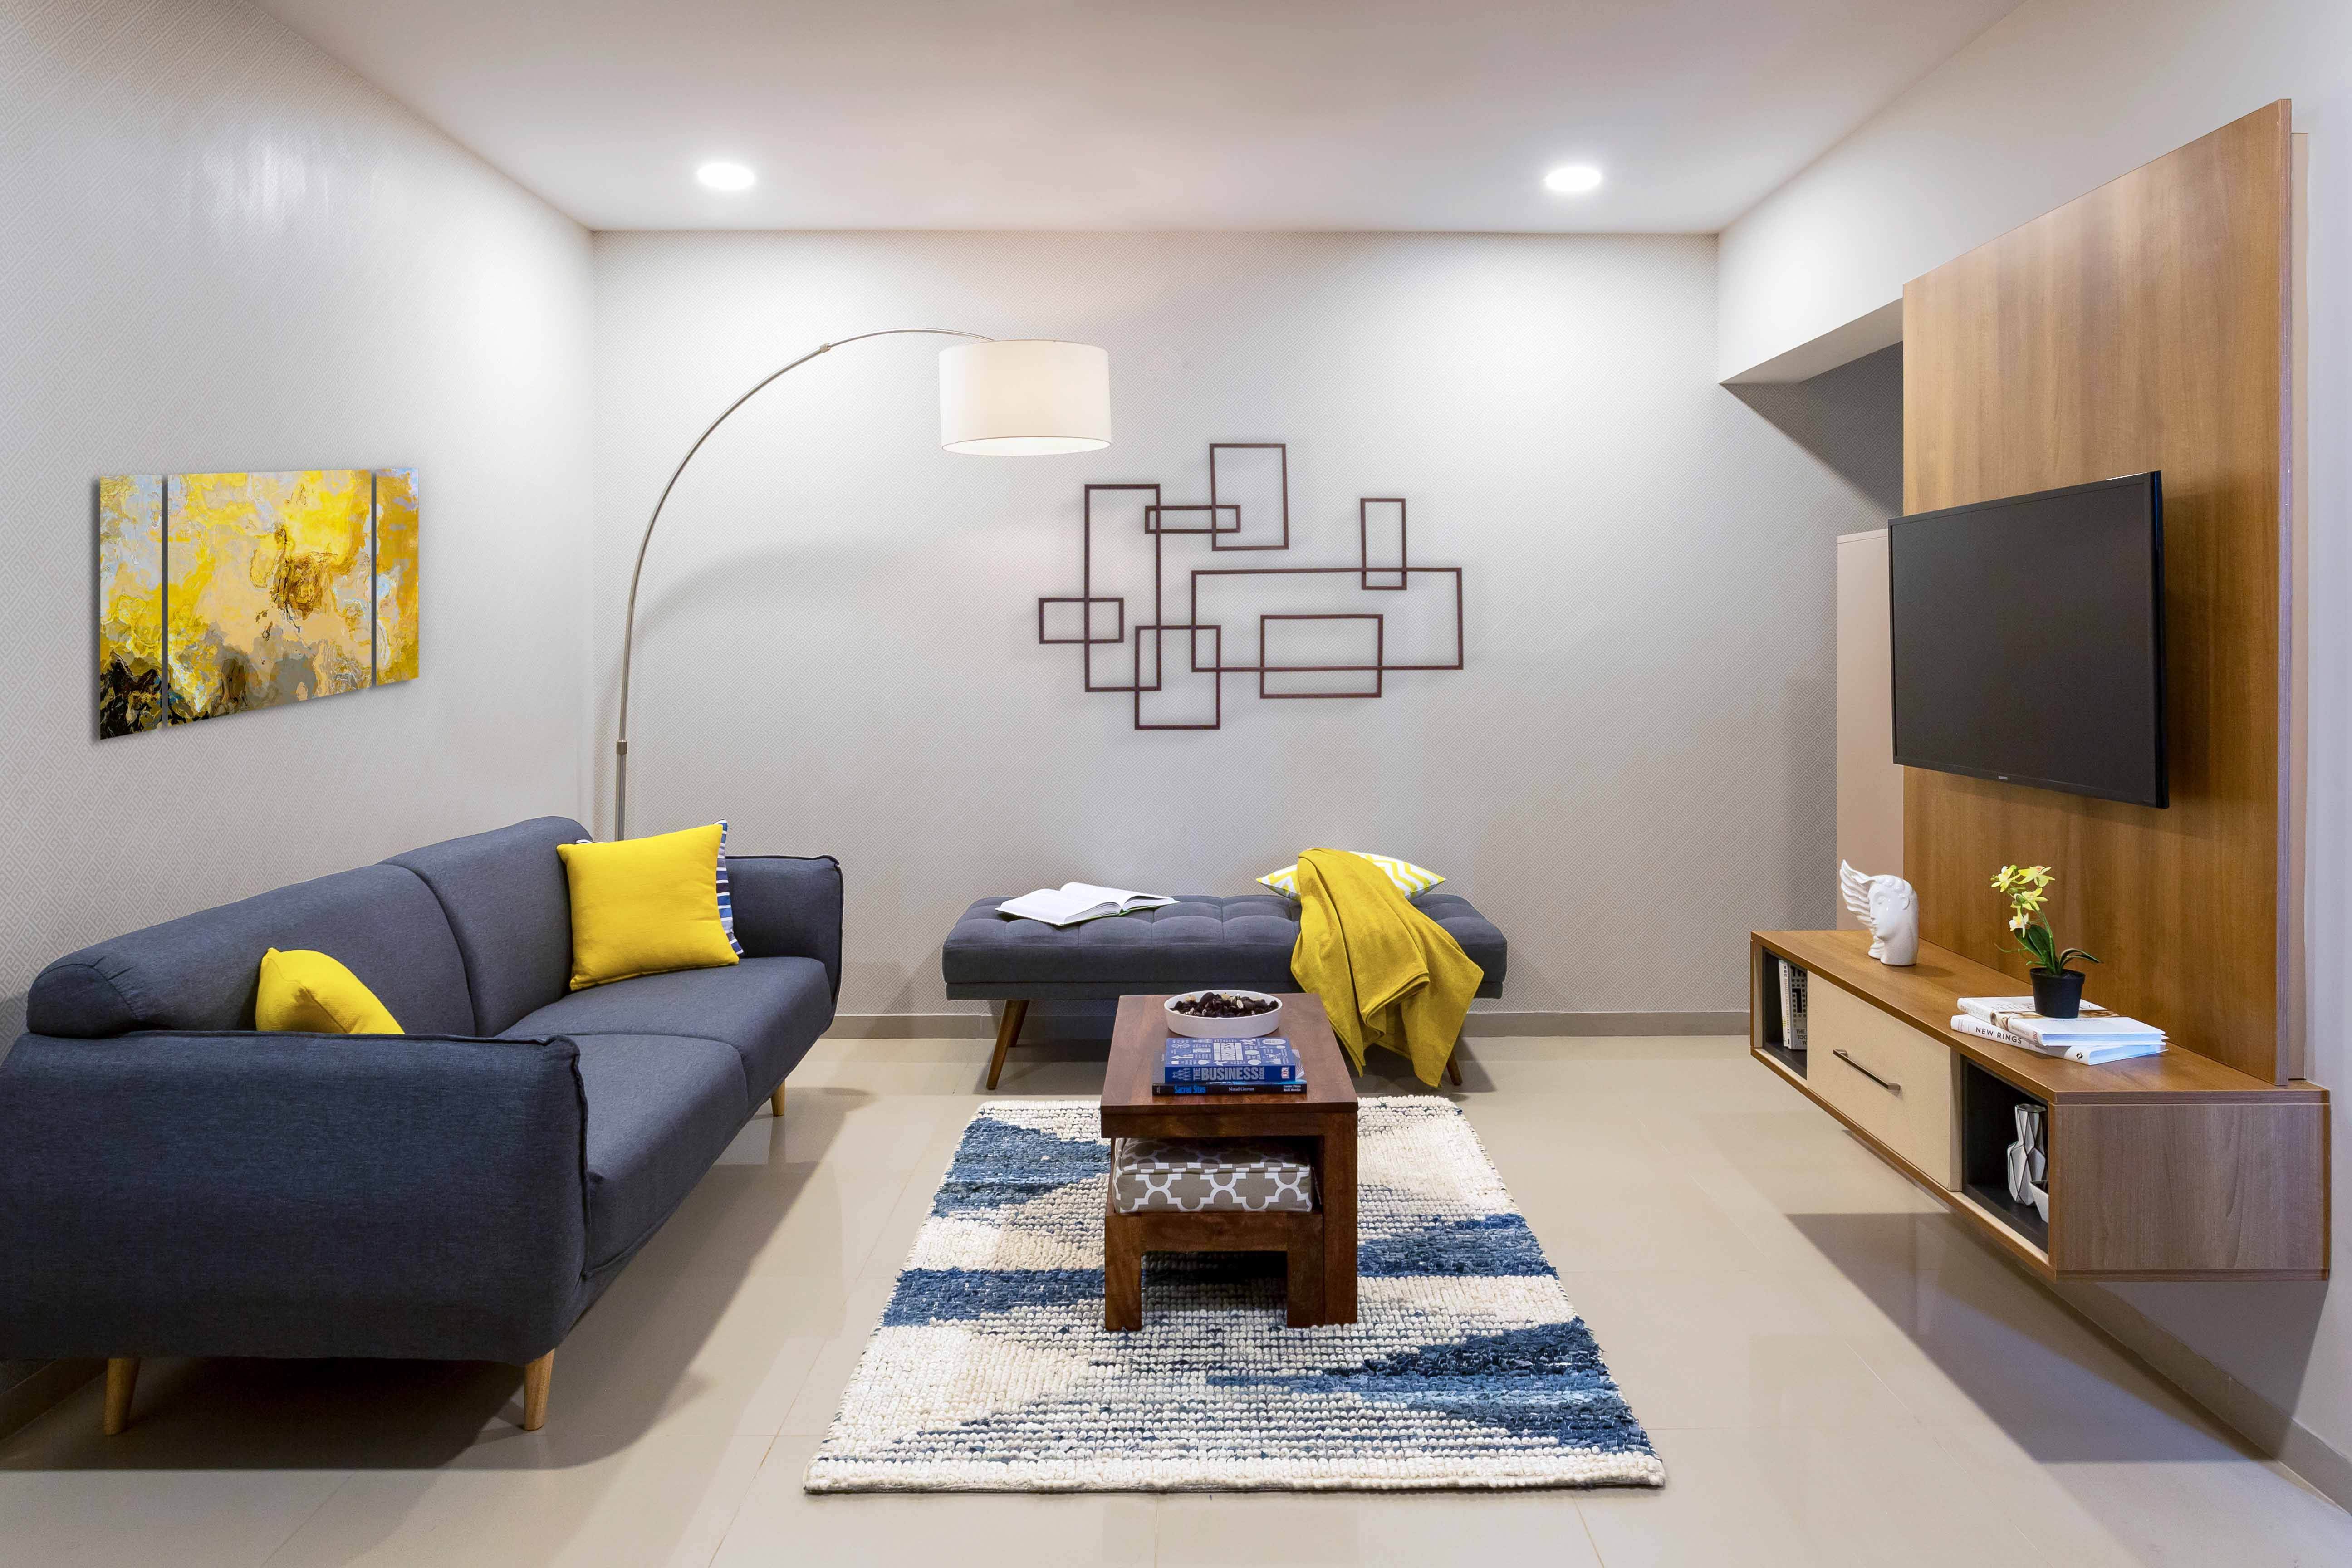 Classic 2-BHK Flat In Bangalore With Minimalistic Blue And Brown Living Room Design